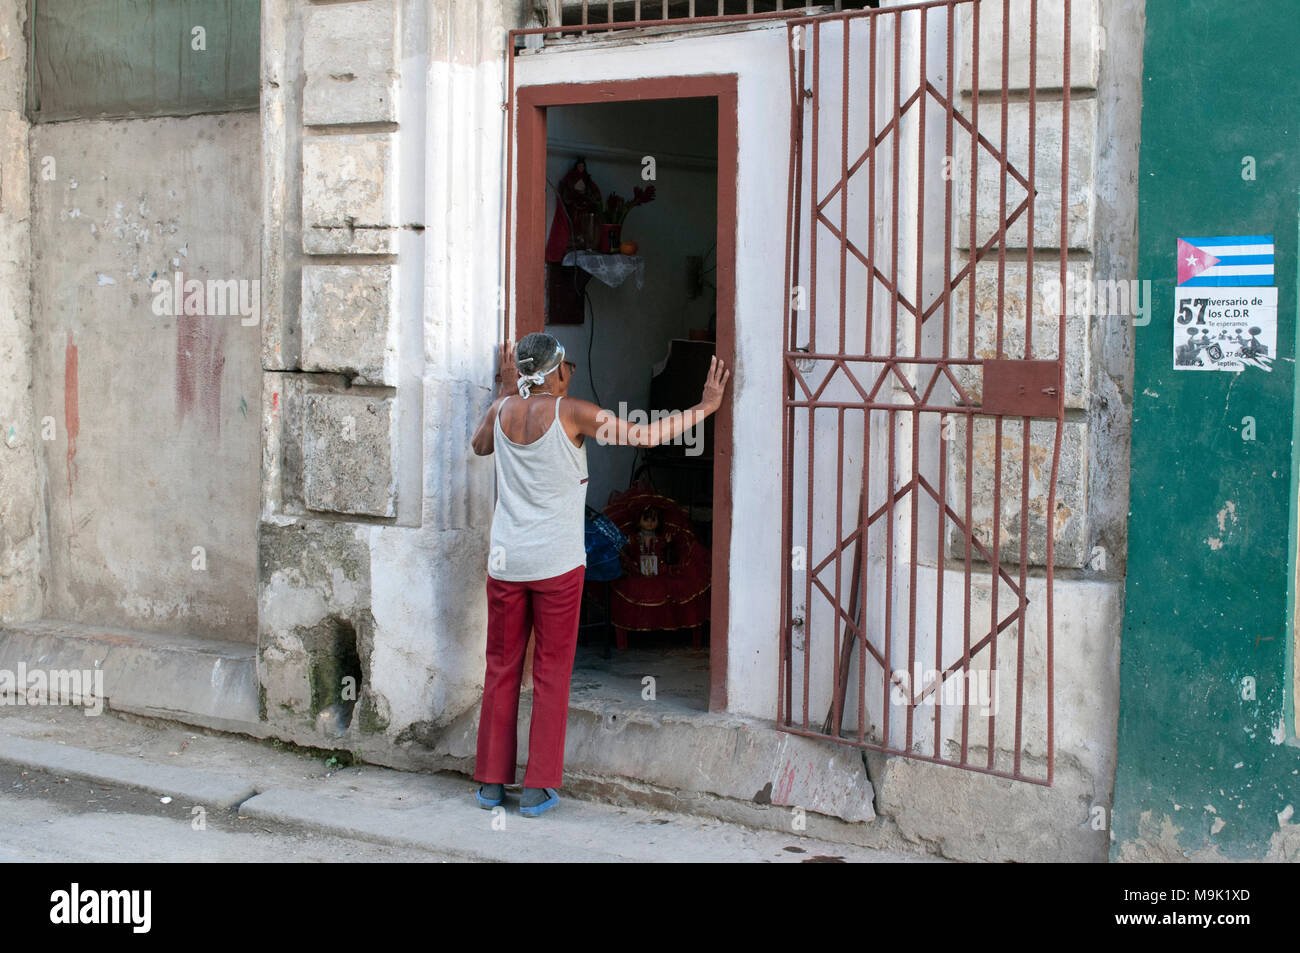 A woman stands on the sidewalk looking into the open doorway of a building in Old Havana, Cuba. Stock Photo